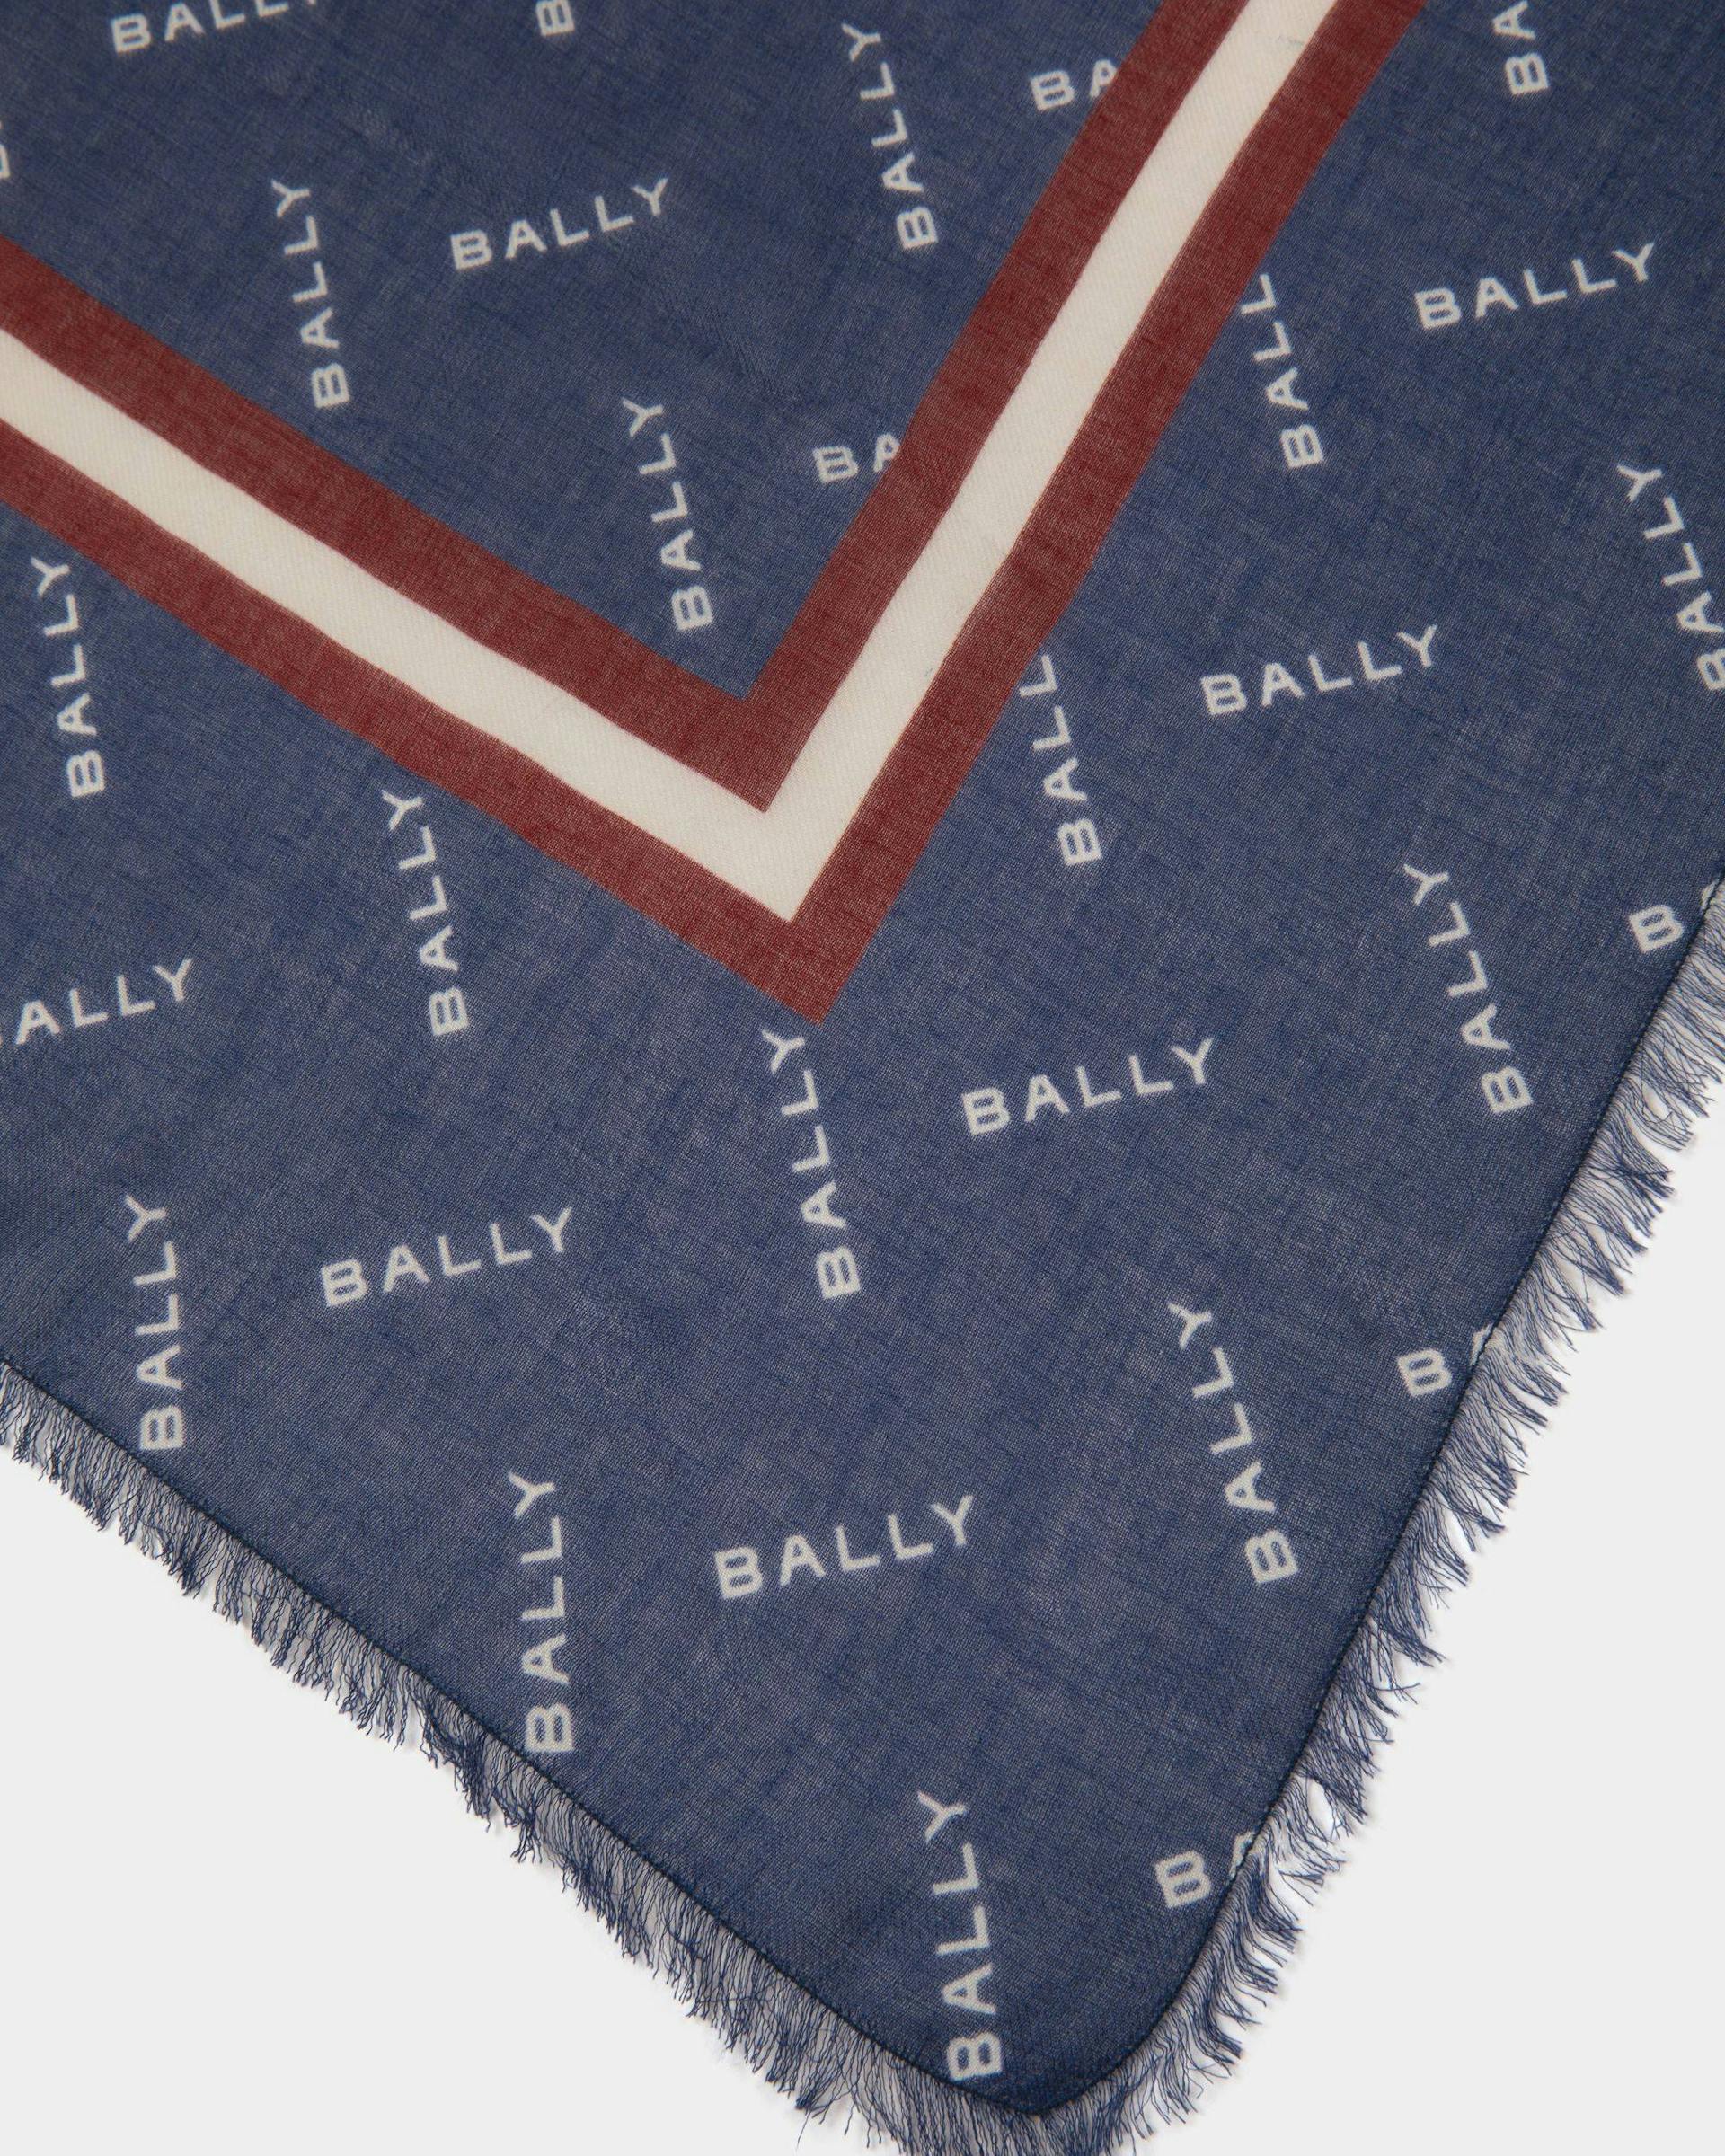 Men's Blue Scarf with a Bally Pattern | Bally | Still Life Detail